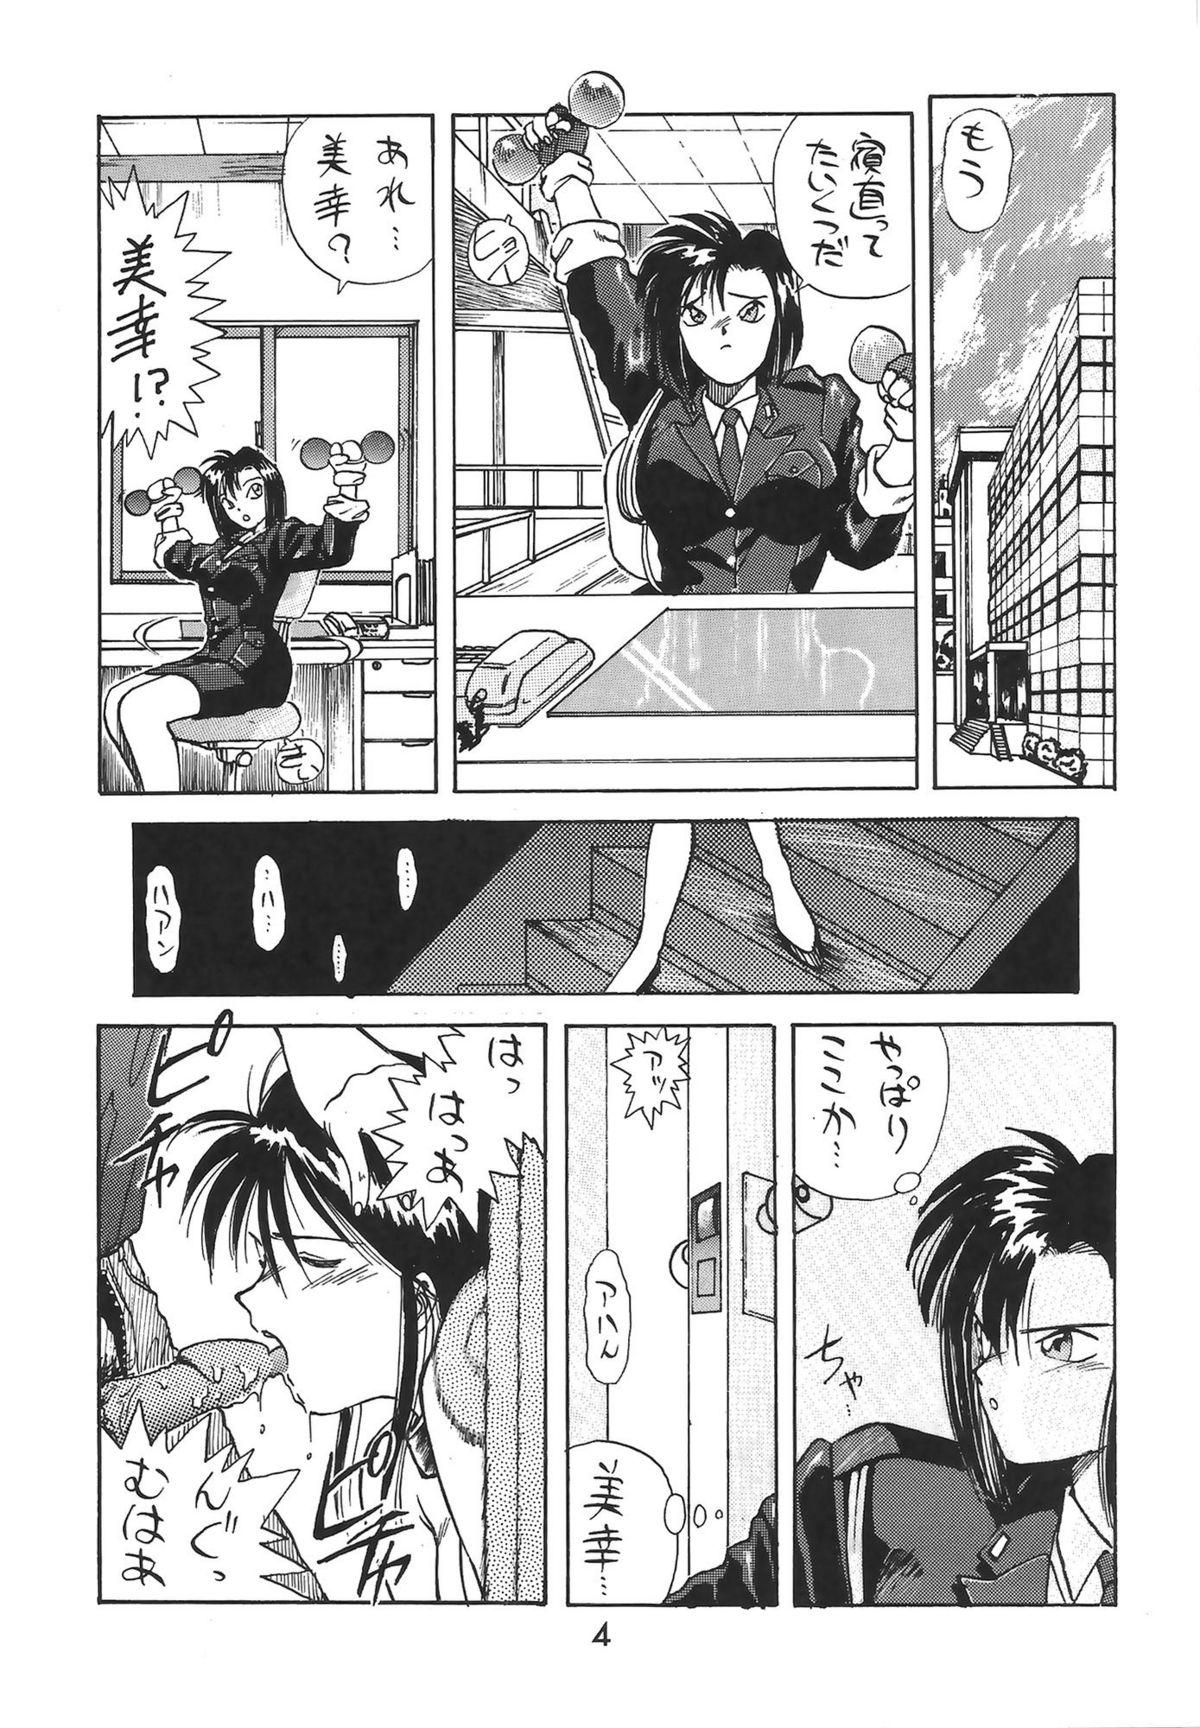 Longhair Madonna Special 2 - Ah my goddess Youre under arrest Glory Hole - Page 4